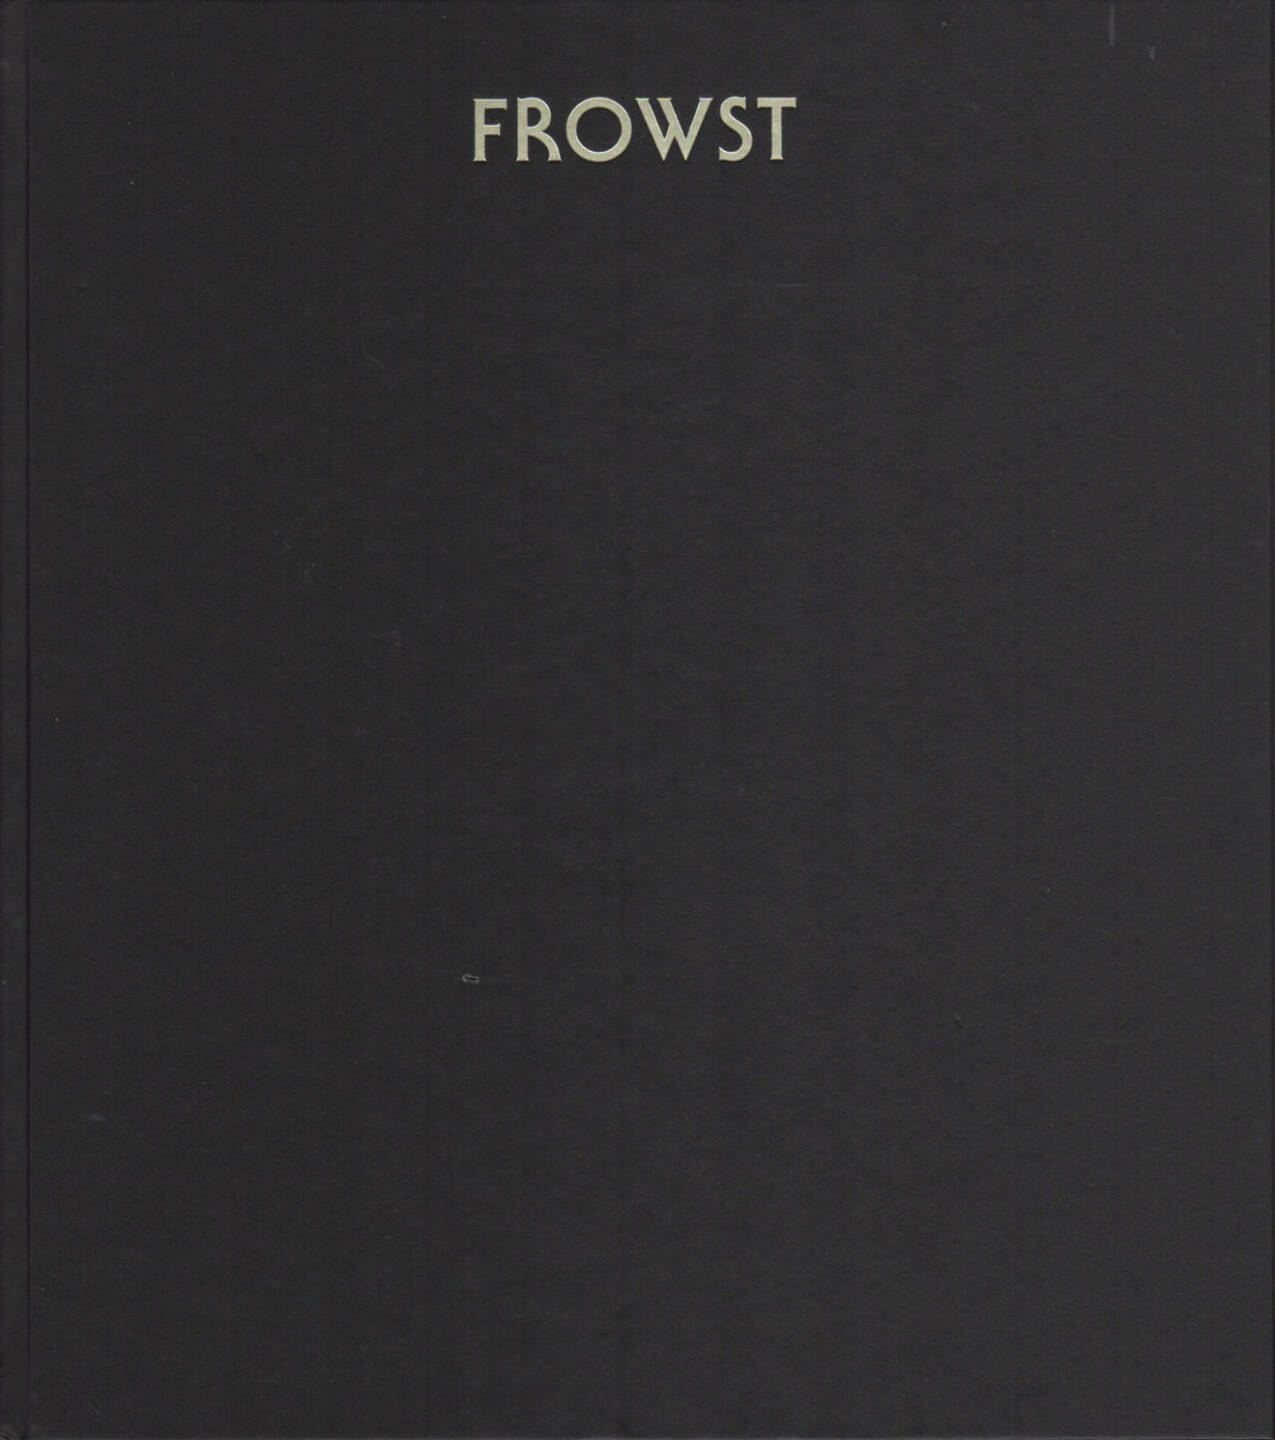 Joanna Piotrowska - FROWST, MACK, 2014, Cover - http://josefchladek.com/book/joanna_piotrowska_-_frowst